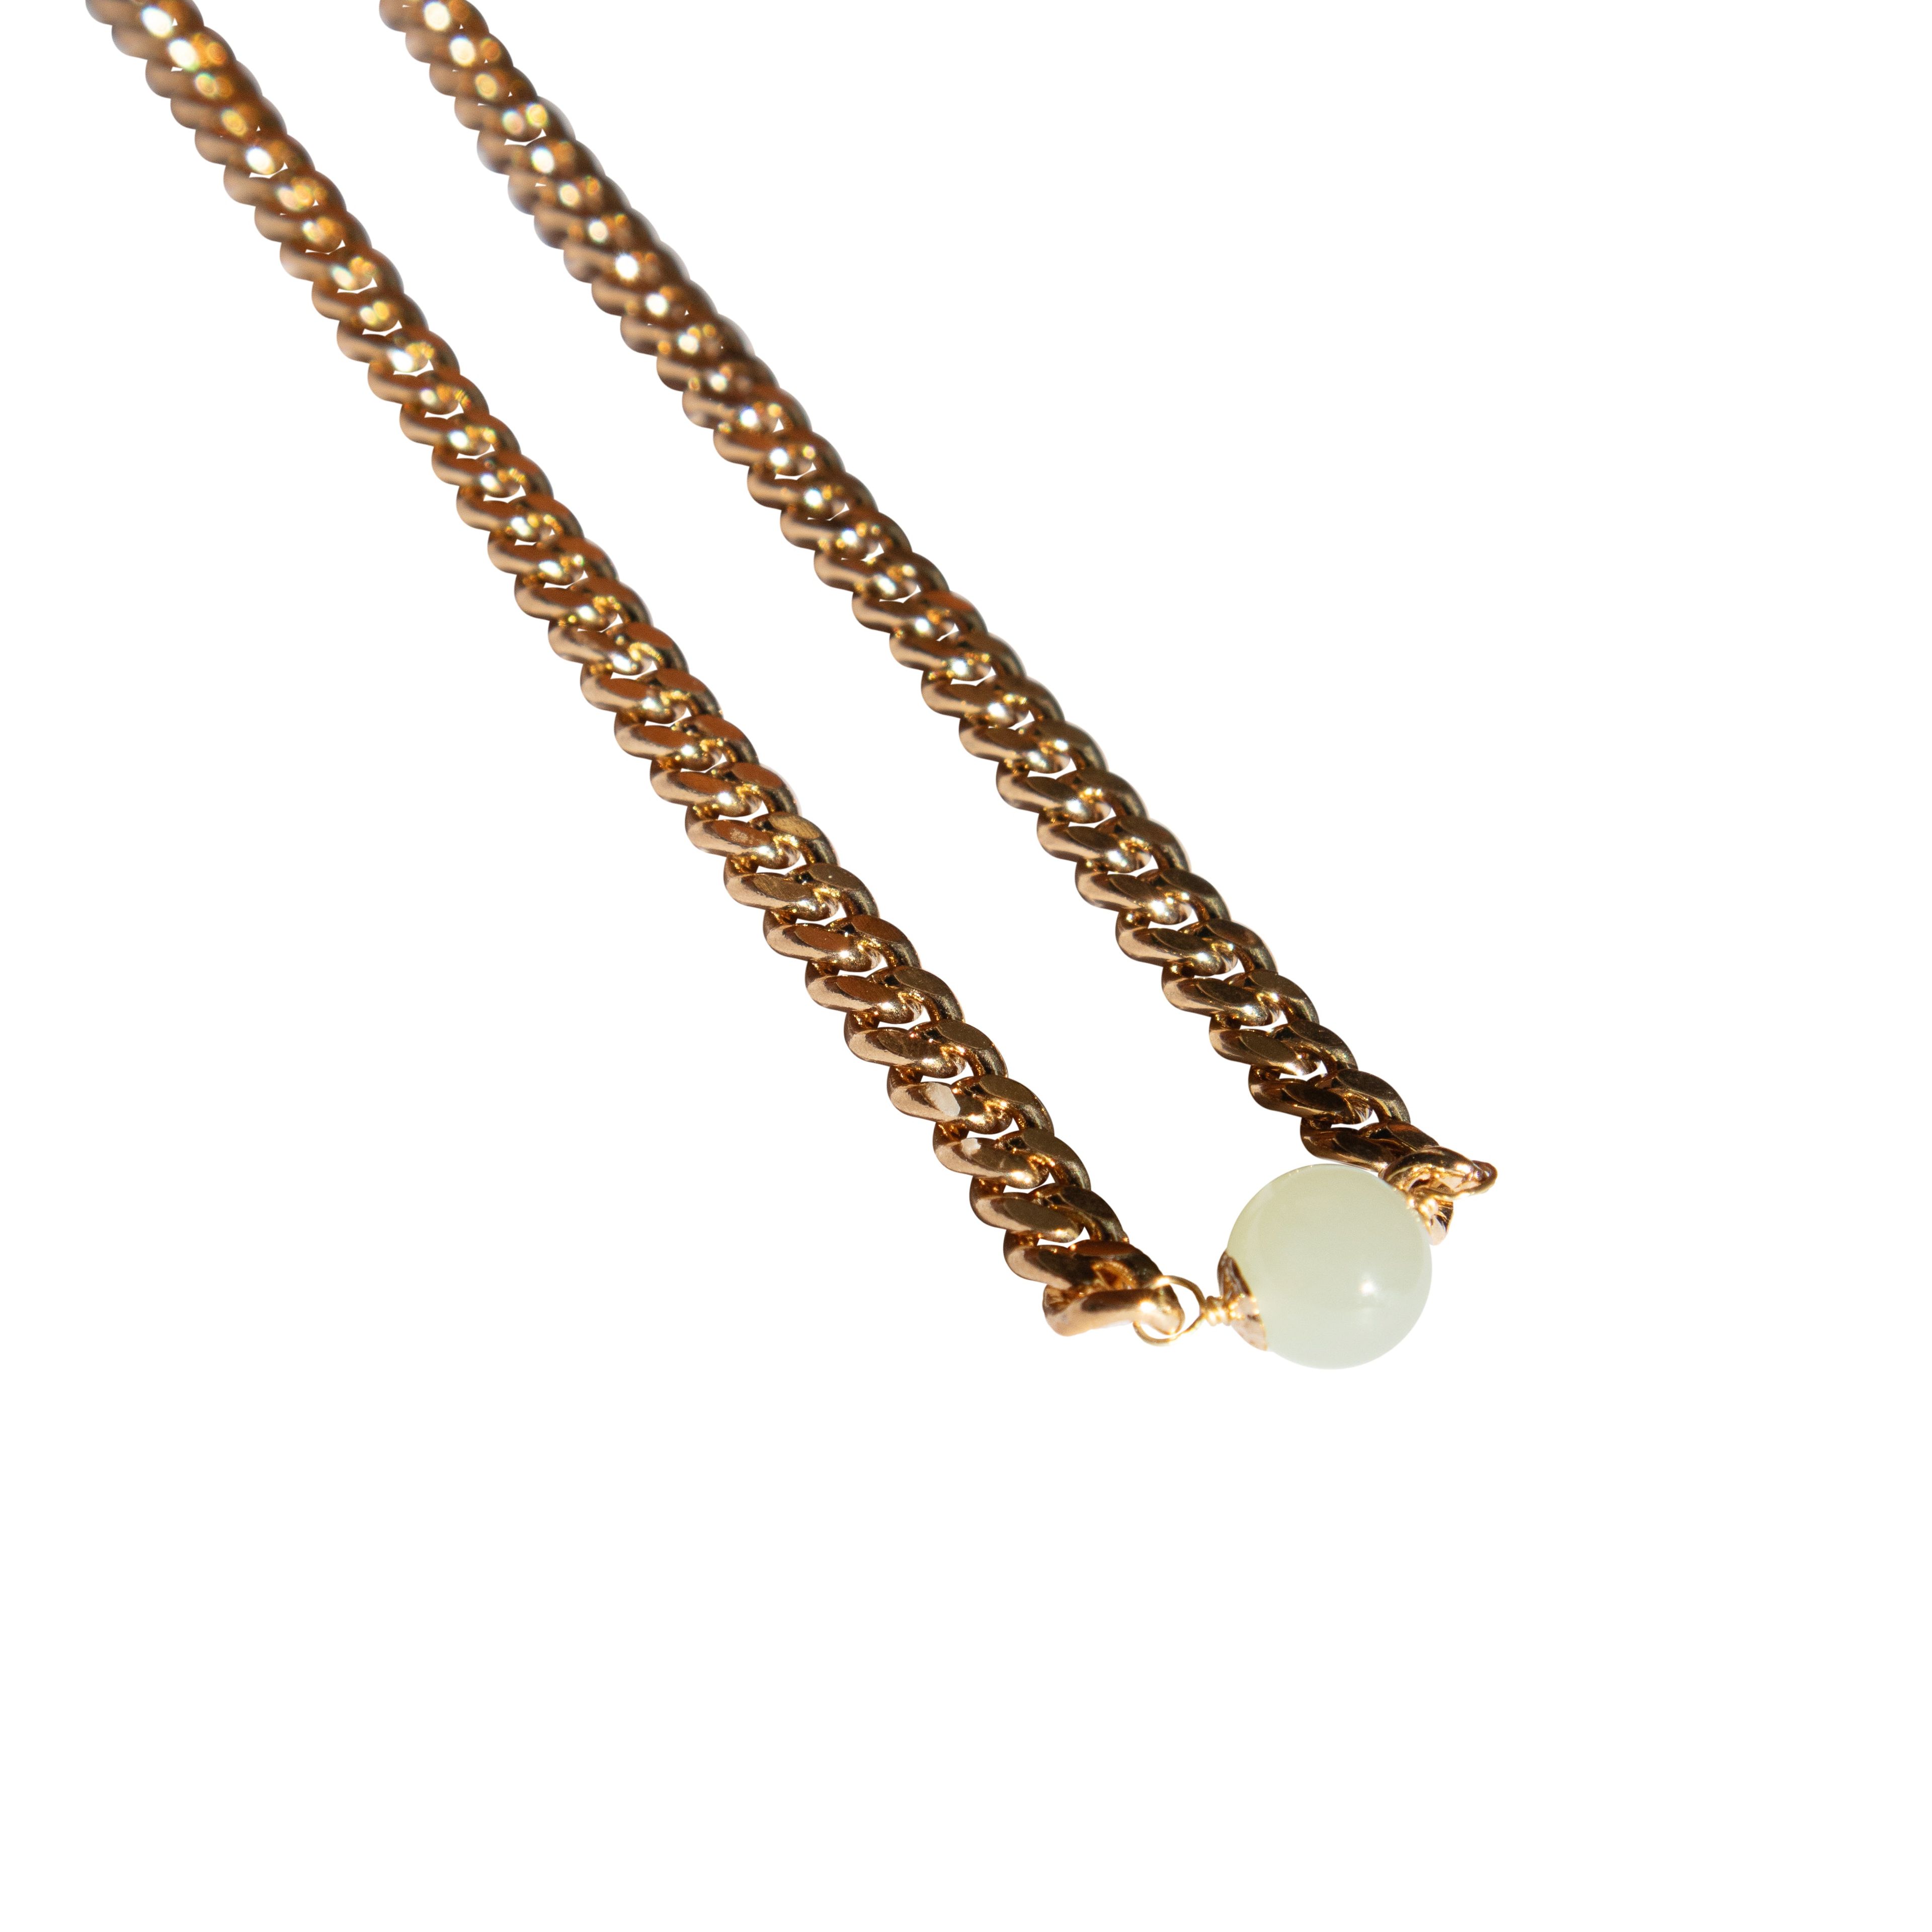 Charlotte — Green jade gold chain necklace